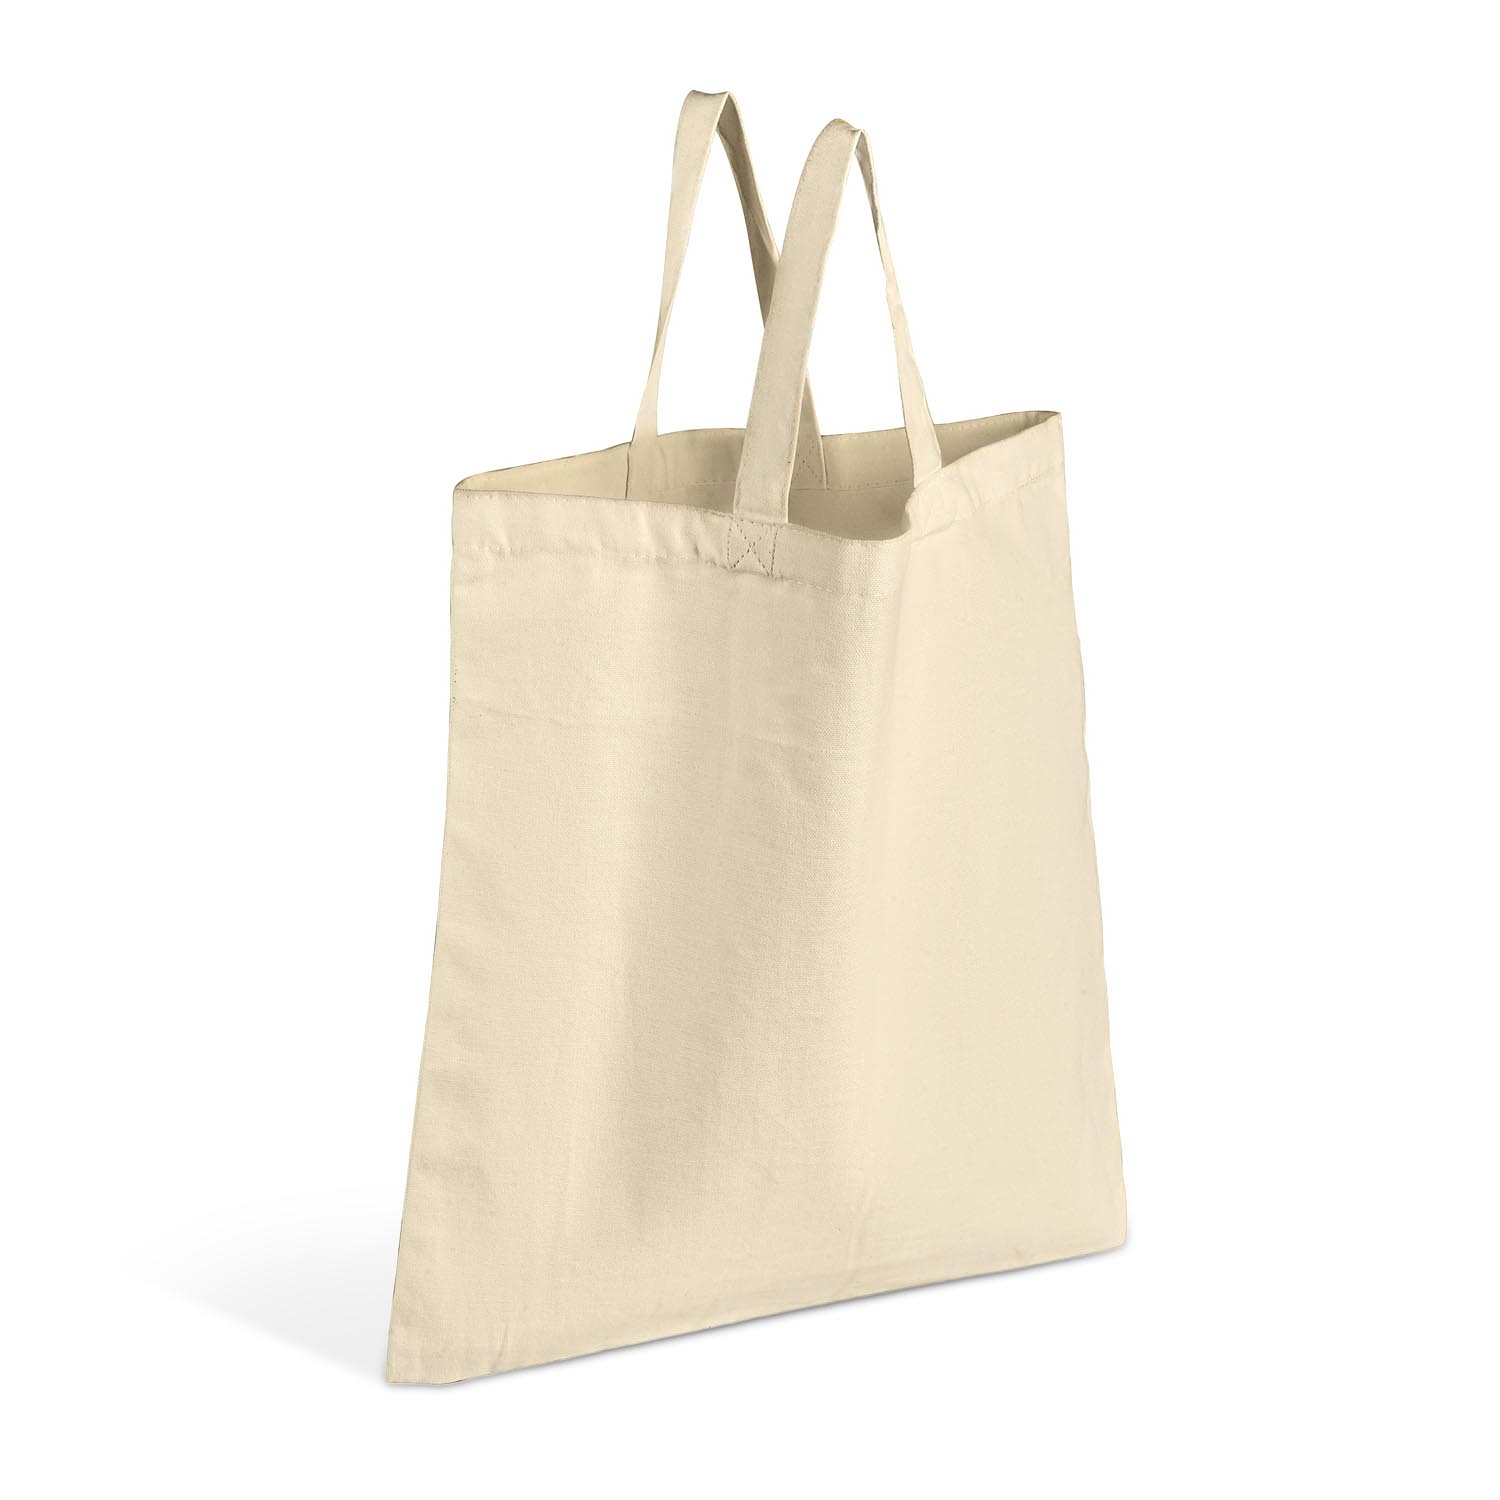 Top 3 Most Asked Canvas Tote Bag Wholesale Questions — We specialize in  fairtrade & organic cotton bags, apparel & accessories